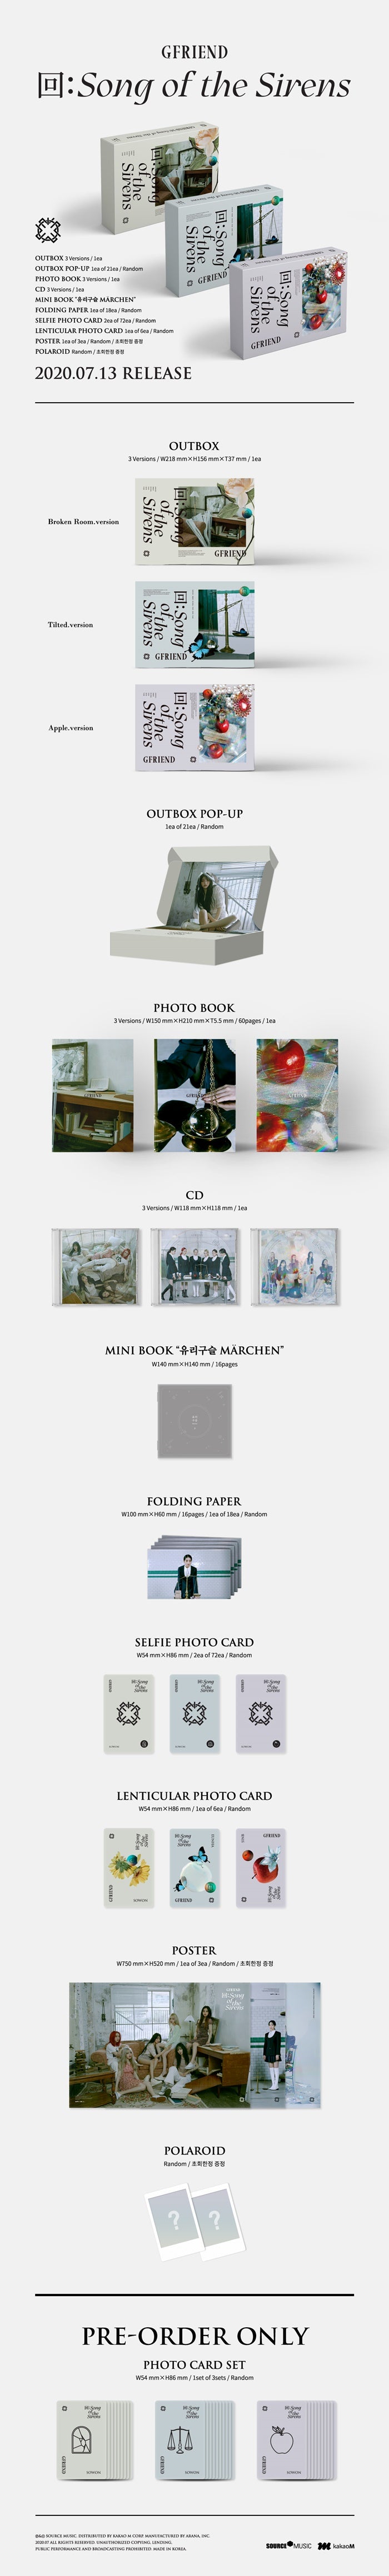 1 CD
1 Photo Book (60 pages)
1 Mini Book (16 pages)
1 Folding Paper (16 pages, random out of 18 types)
2 Selfie Photo Card...